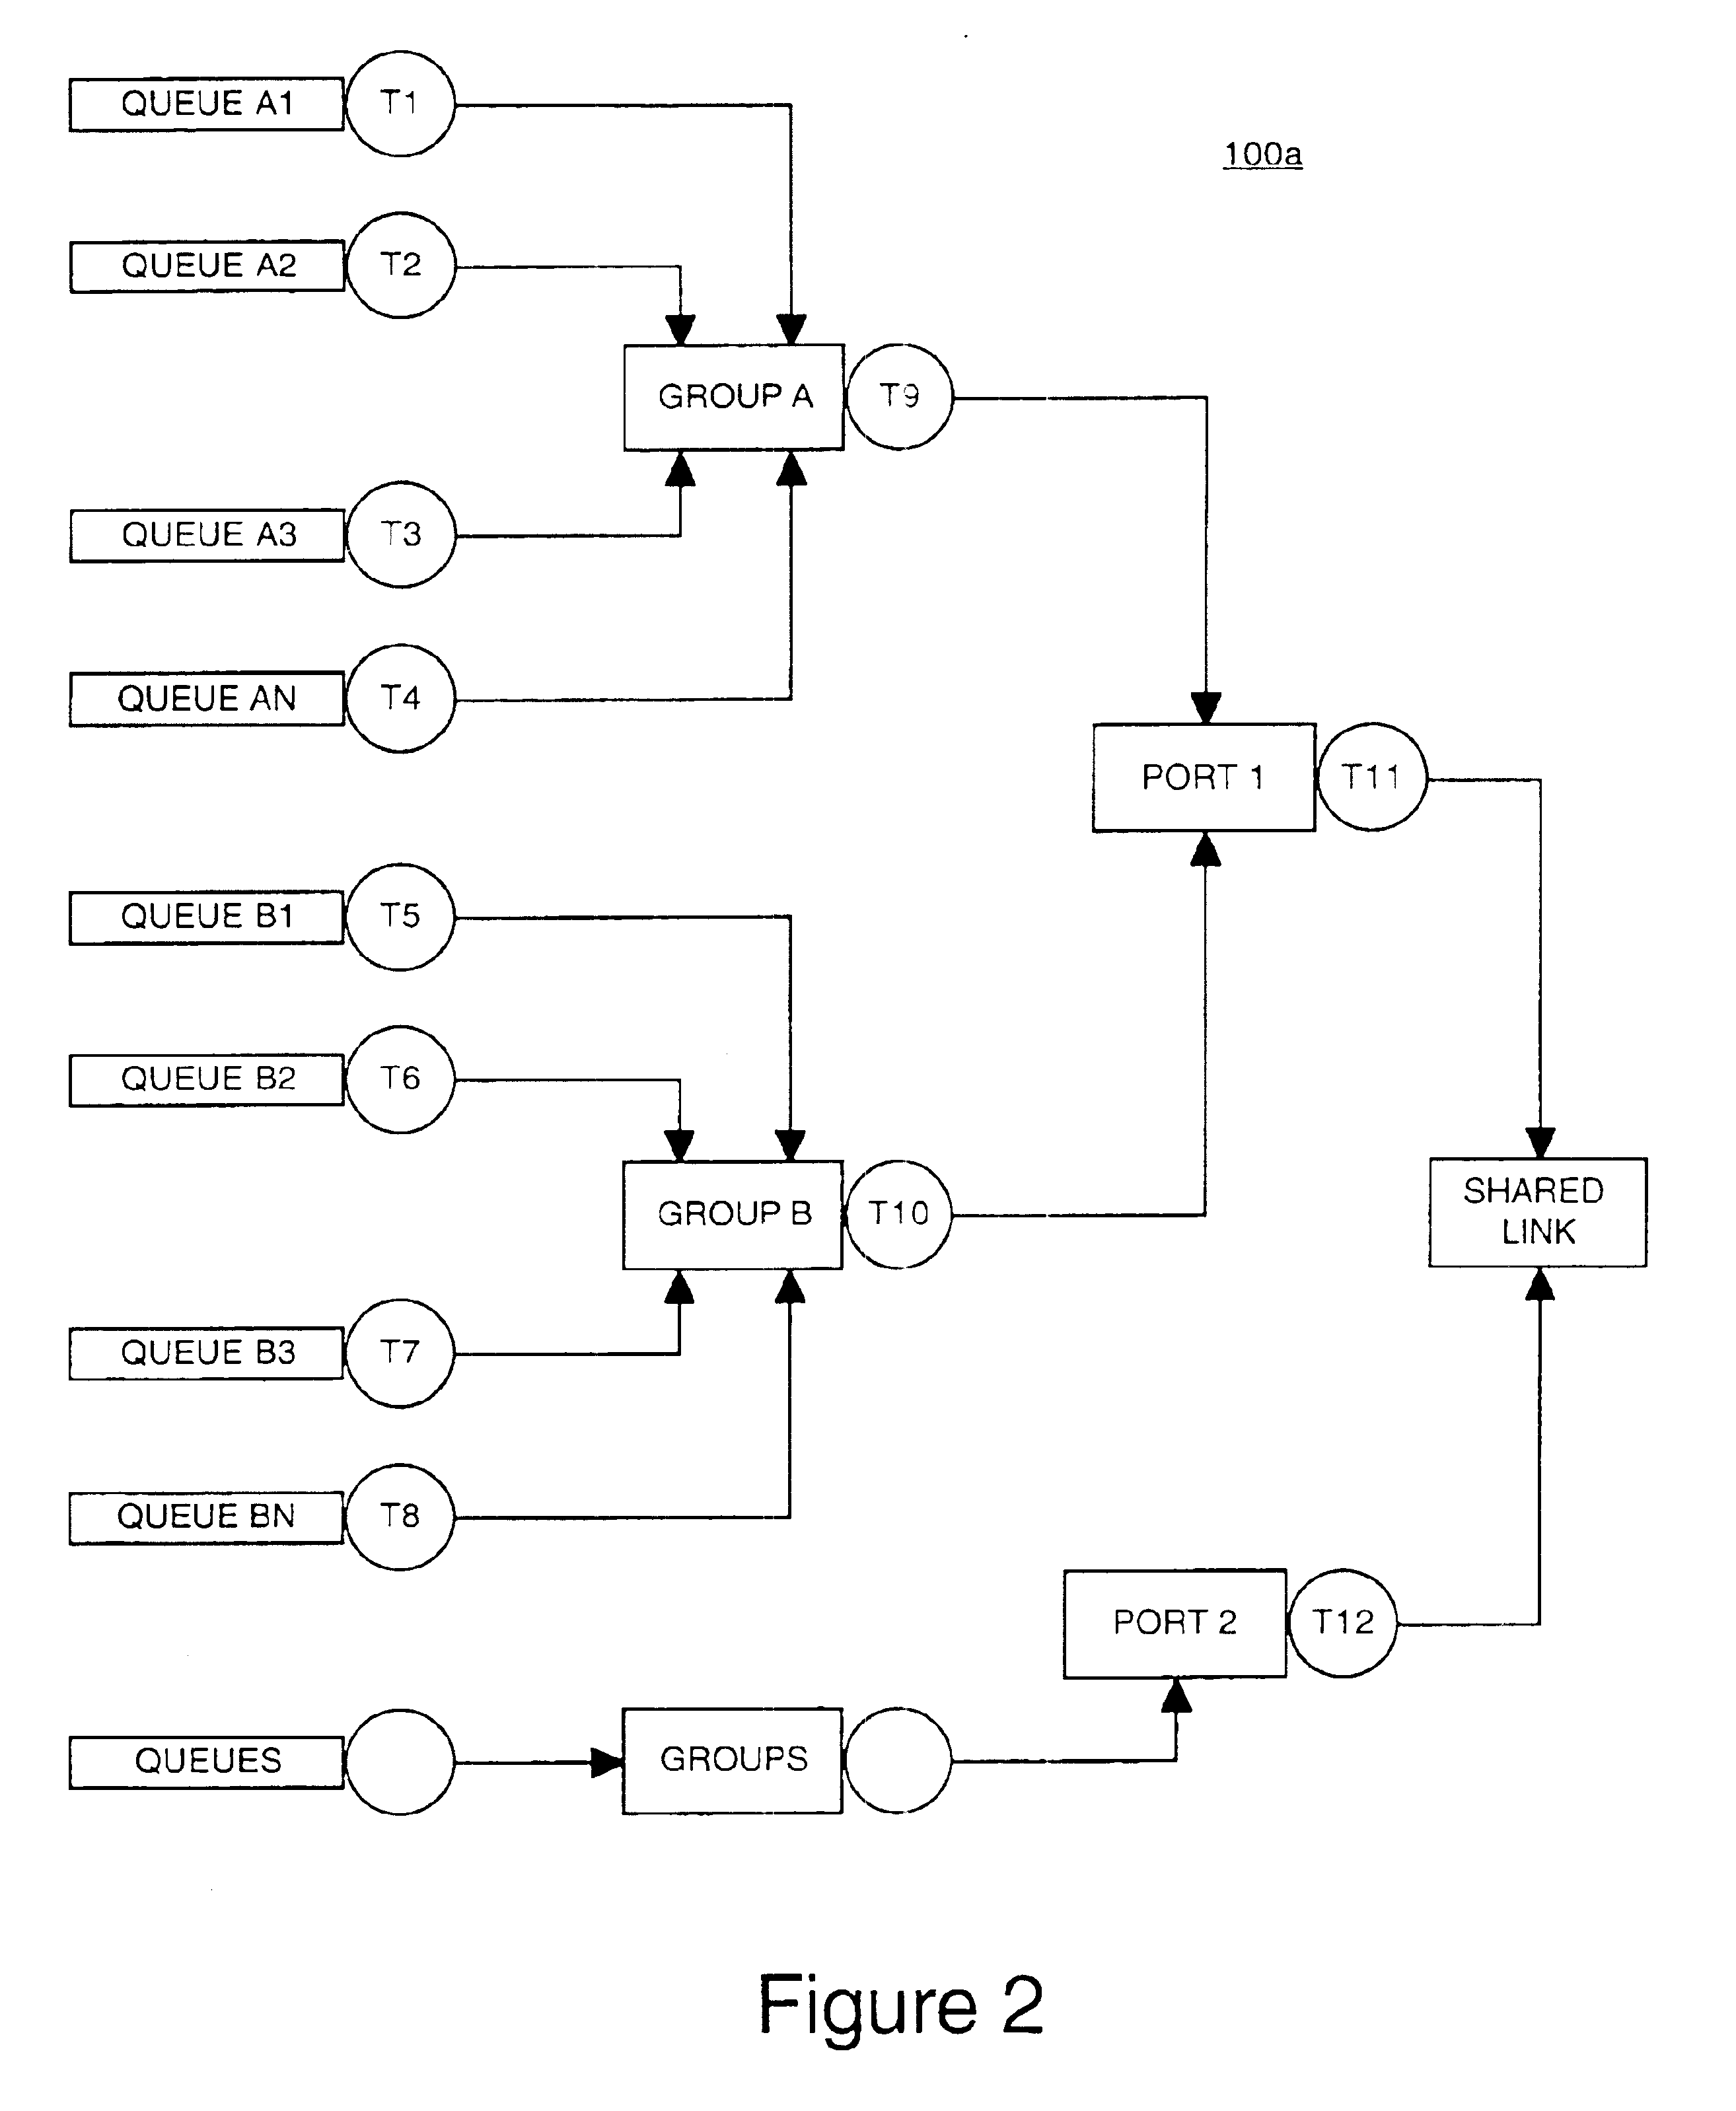 Multiple update frequencies for counters in a multi-level shaping system